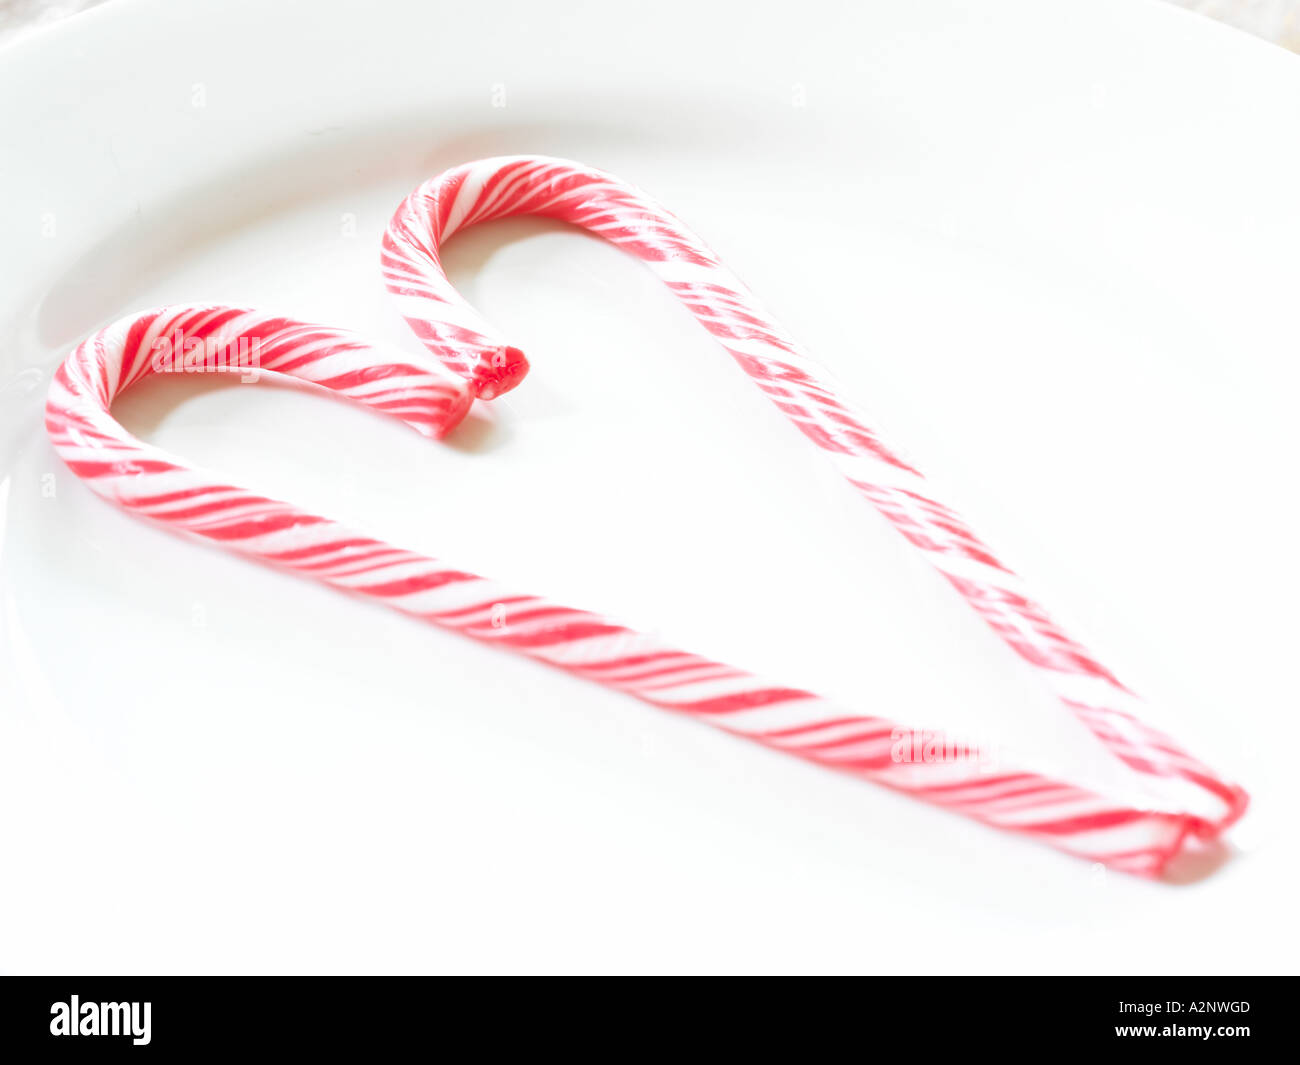 red and white candy cane sticks making a symbol of a hart shape laying on table plate backlit by window light Stock Photo